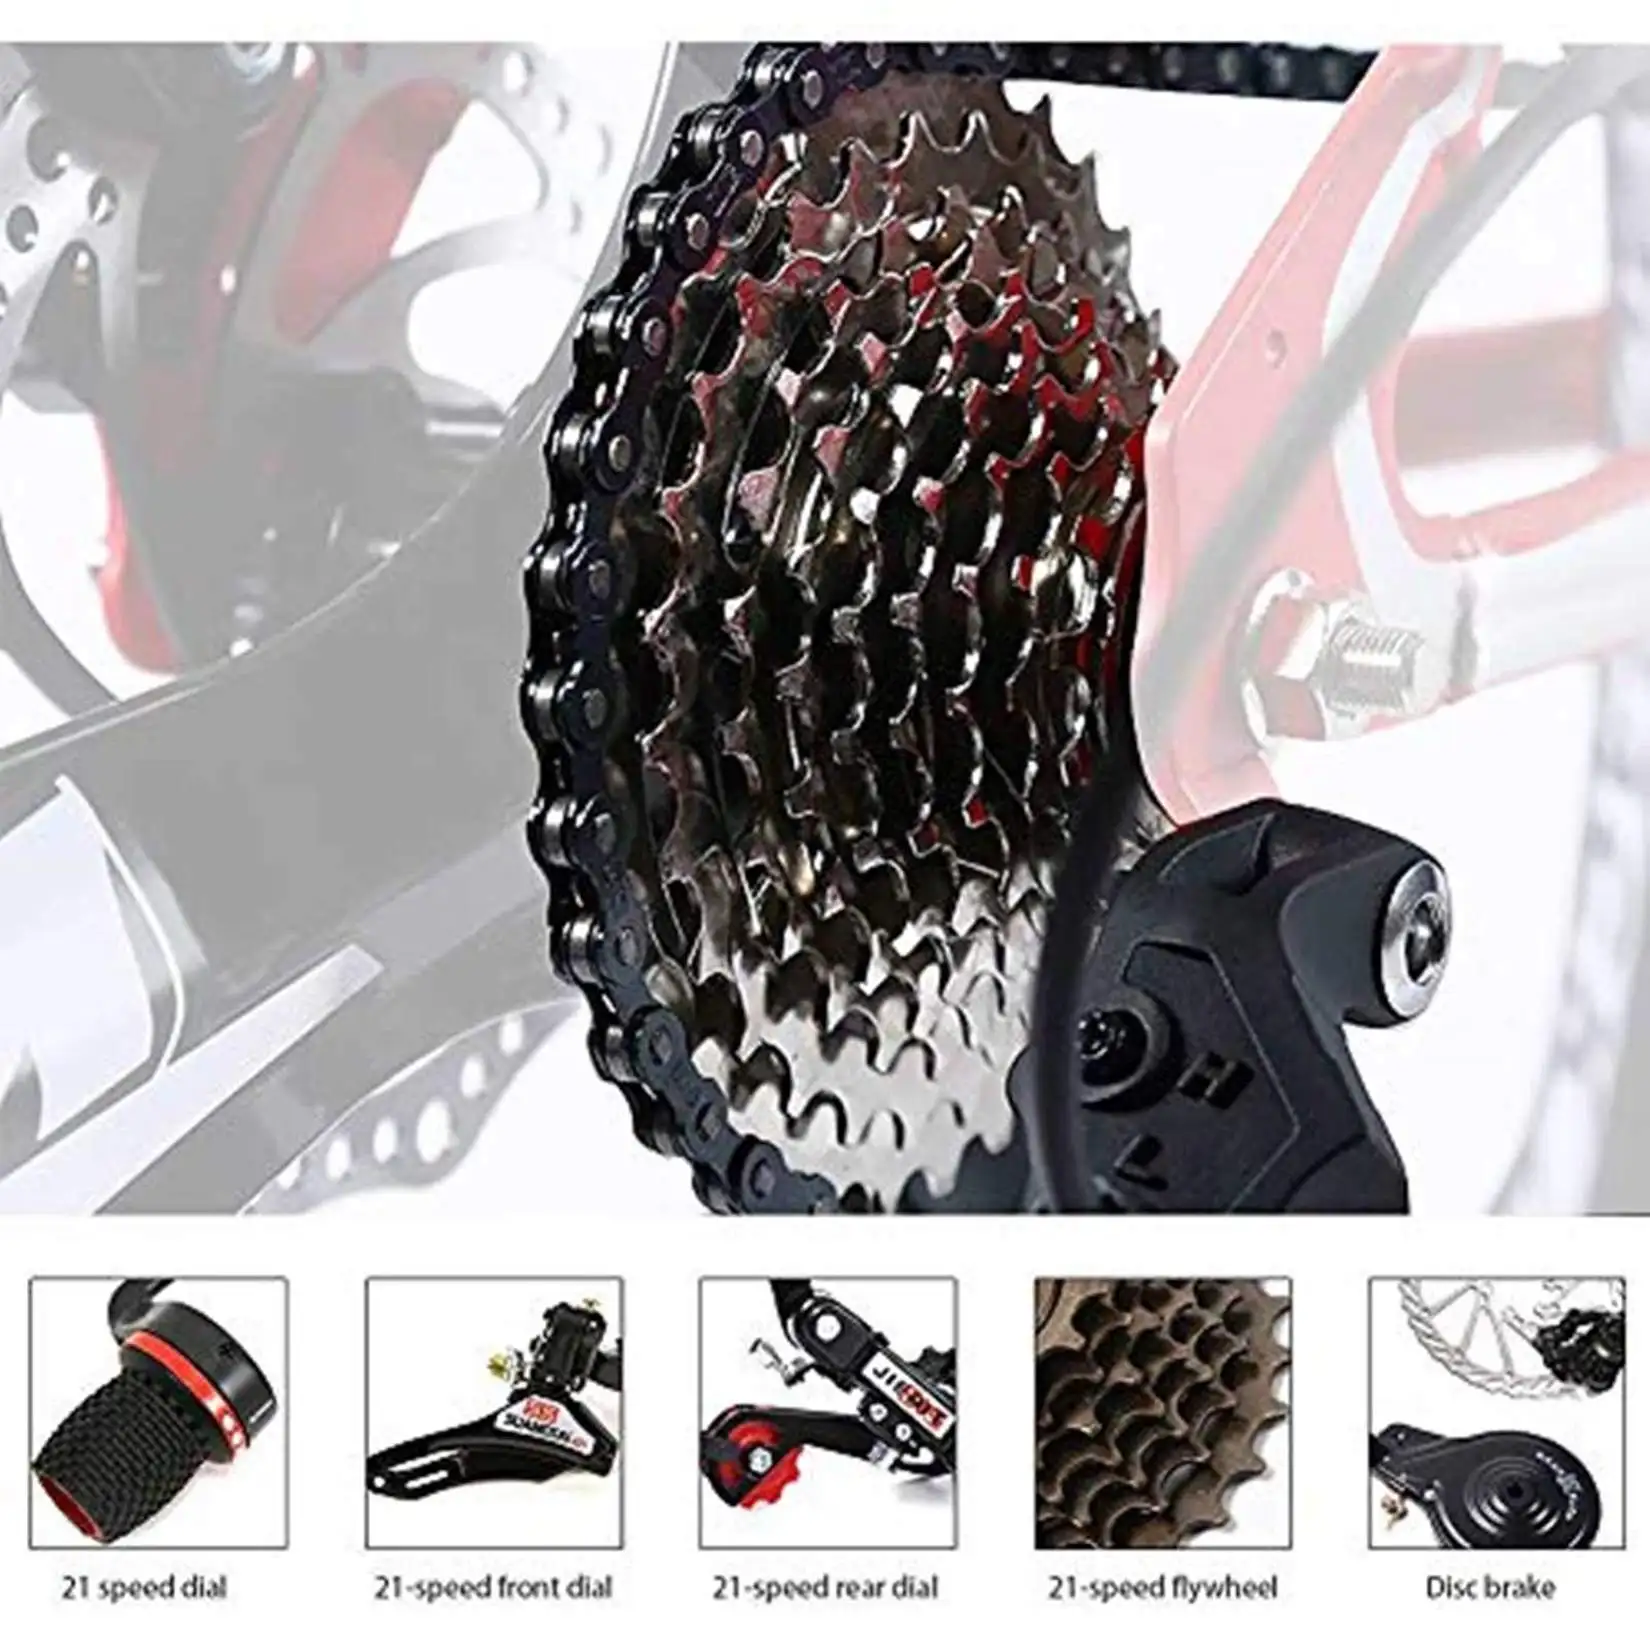 Twist Shift Black HIRUNS Full Mountain Bike,Mens and Womens Professional 21 Speed Gears 26in Bicycle 